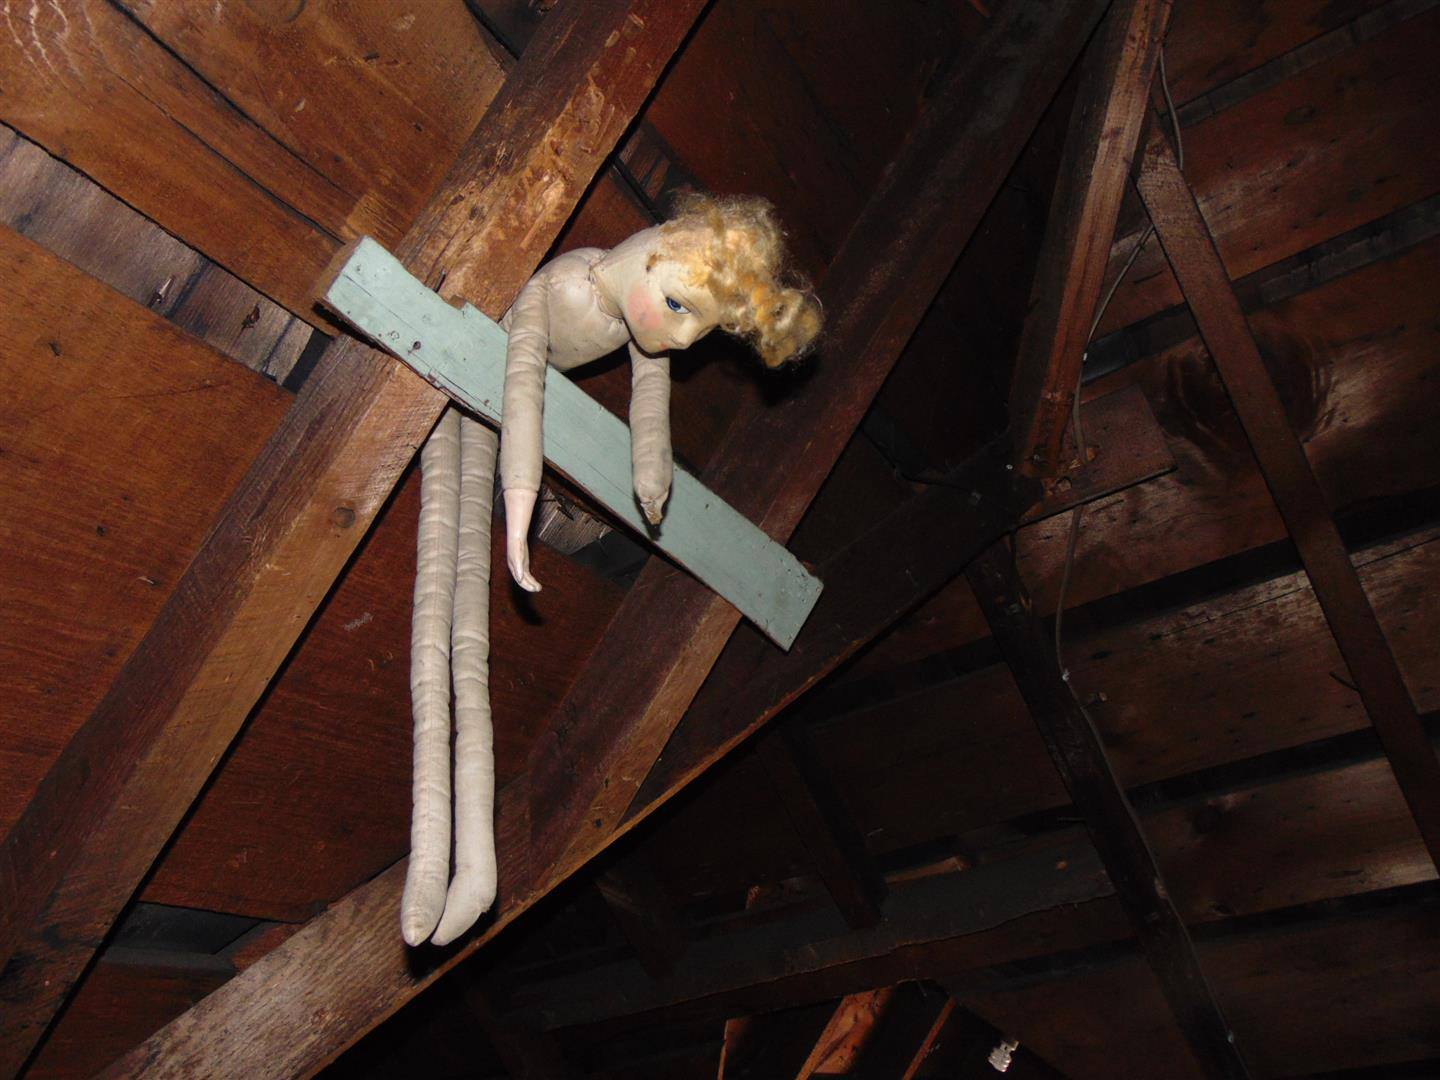 Animals Skeletons And Creepy Home Inspection Stuff Part 2